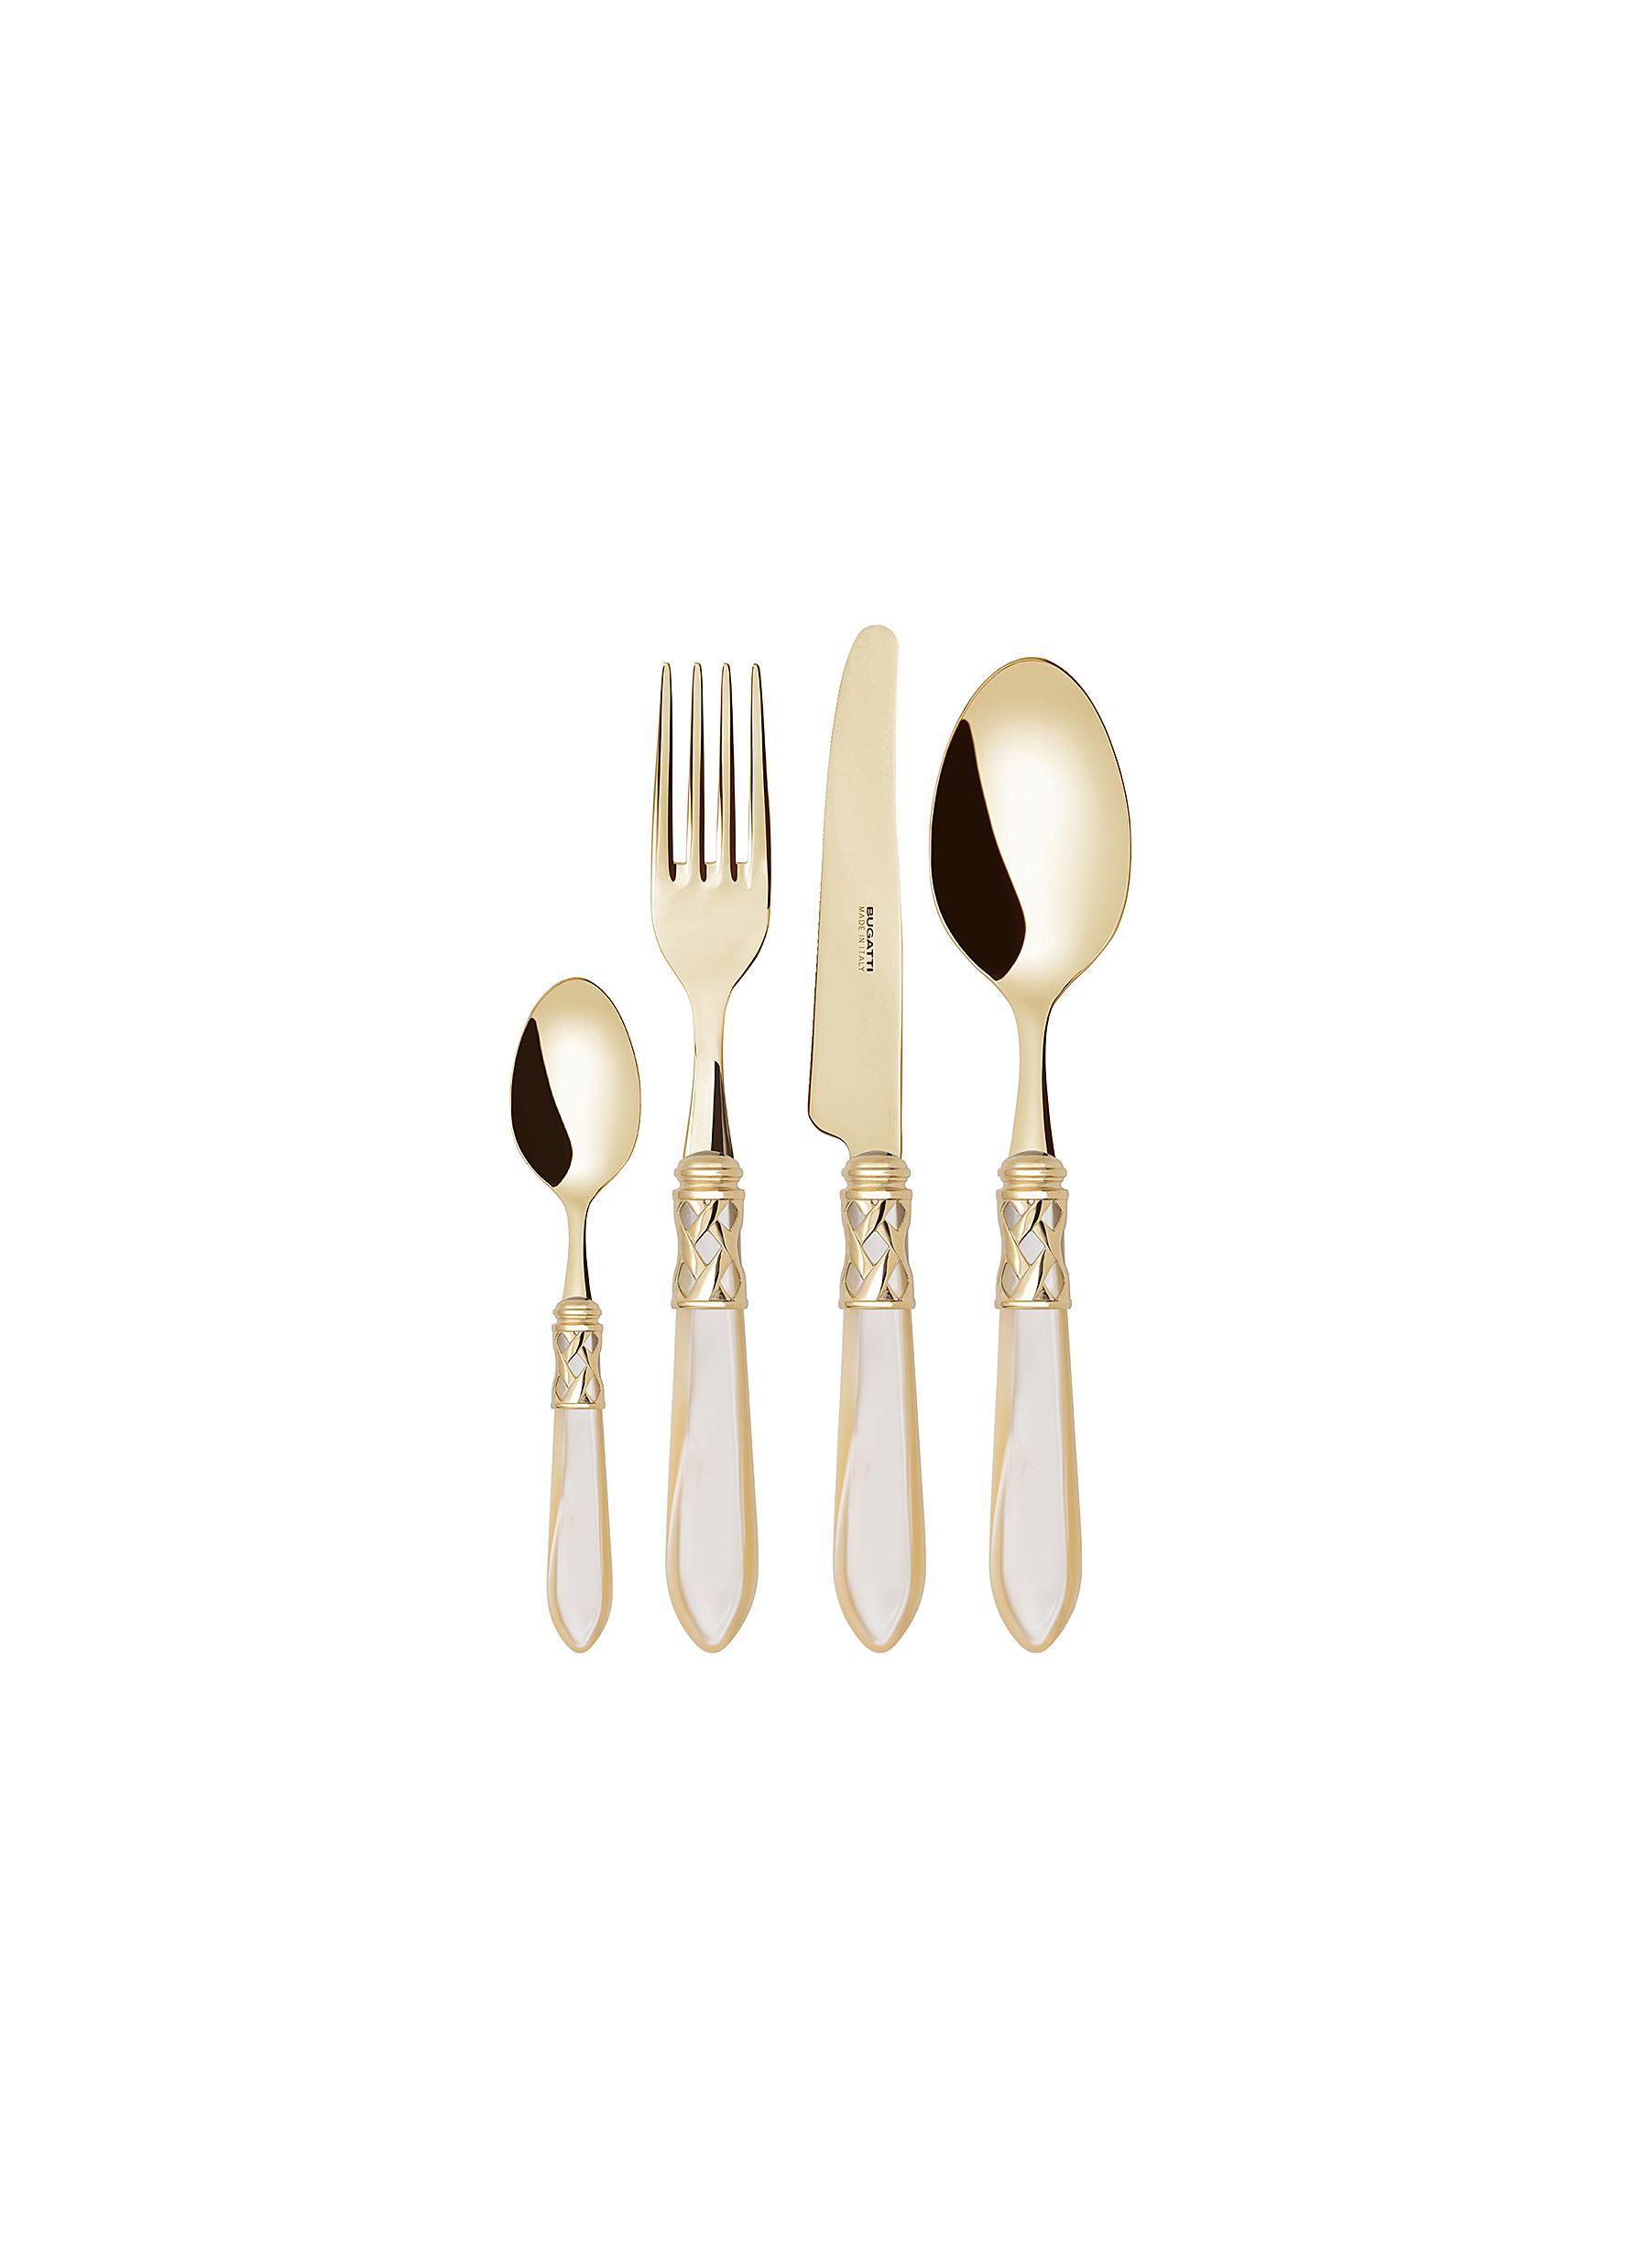 Aladdin’ 24K Gold Plated Stainless Steel Cutlery Set